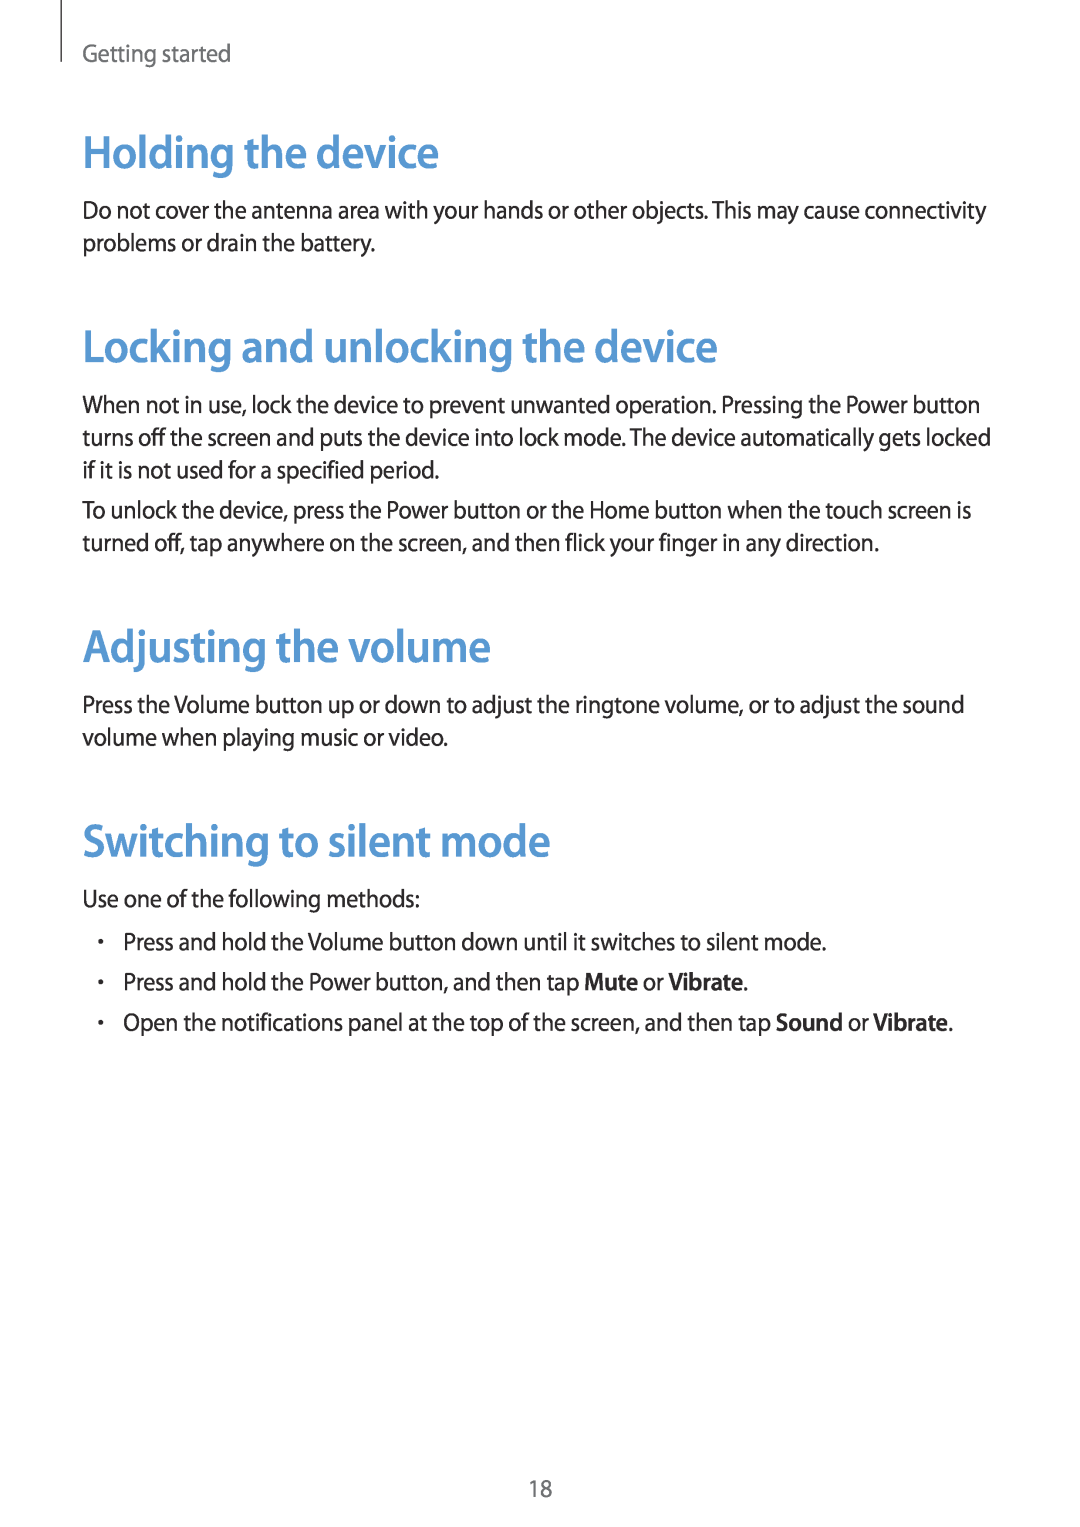 Samsung GT-S6790MKNATO manual Holding the device, Locking and unlocking the device, Adjusting the volume, Getting started 